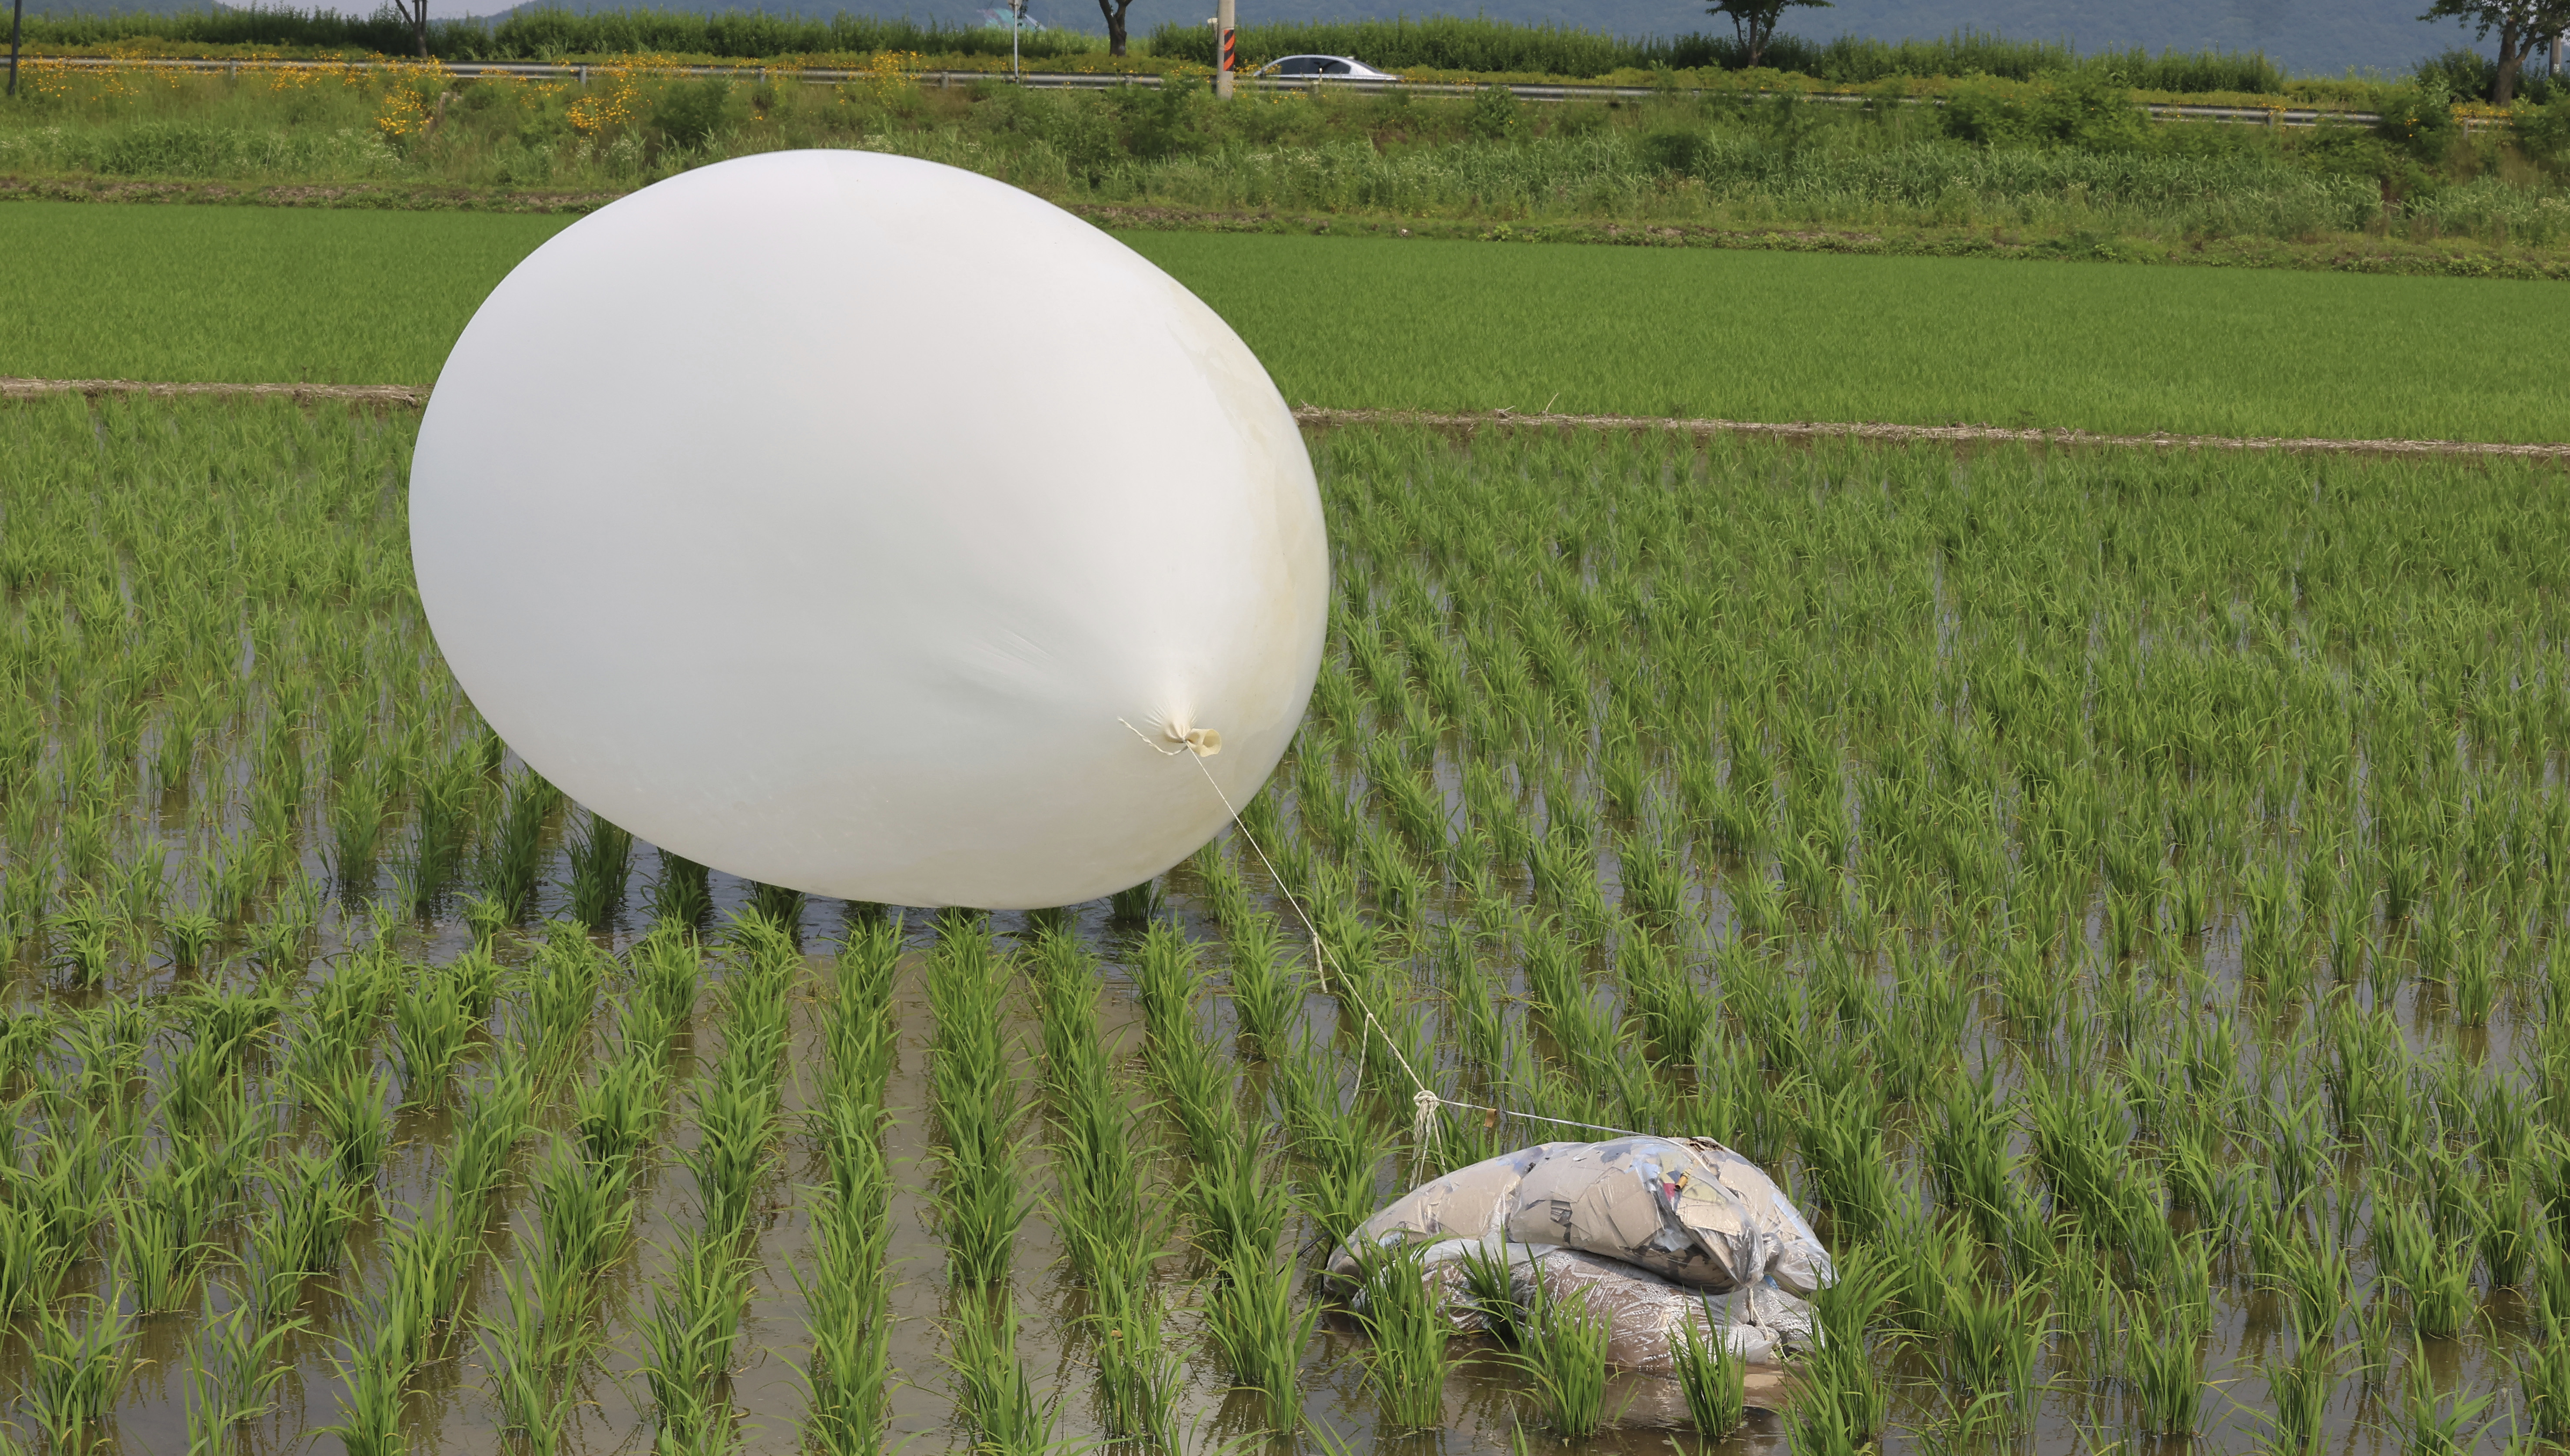 FILE - A balloon presumably sent by North Korea, is seen in a paddy field in Incheon, South Korea, on June 10, 2024. North Korea launched more balloons likely carrying rubbish toward South Korea on Sunday, July 21, two days after the South restarted blaring anti-Pyongyang propaganda broadcasts across the border in retaliation for the North’s repeated balloon campaigns, Seoul officials said.(Im Sun-suk/Yonhap via AP, File)